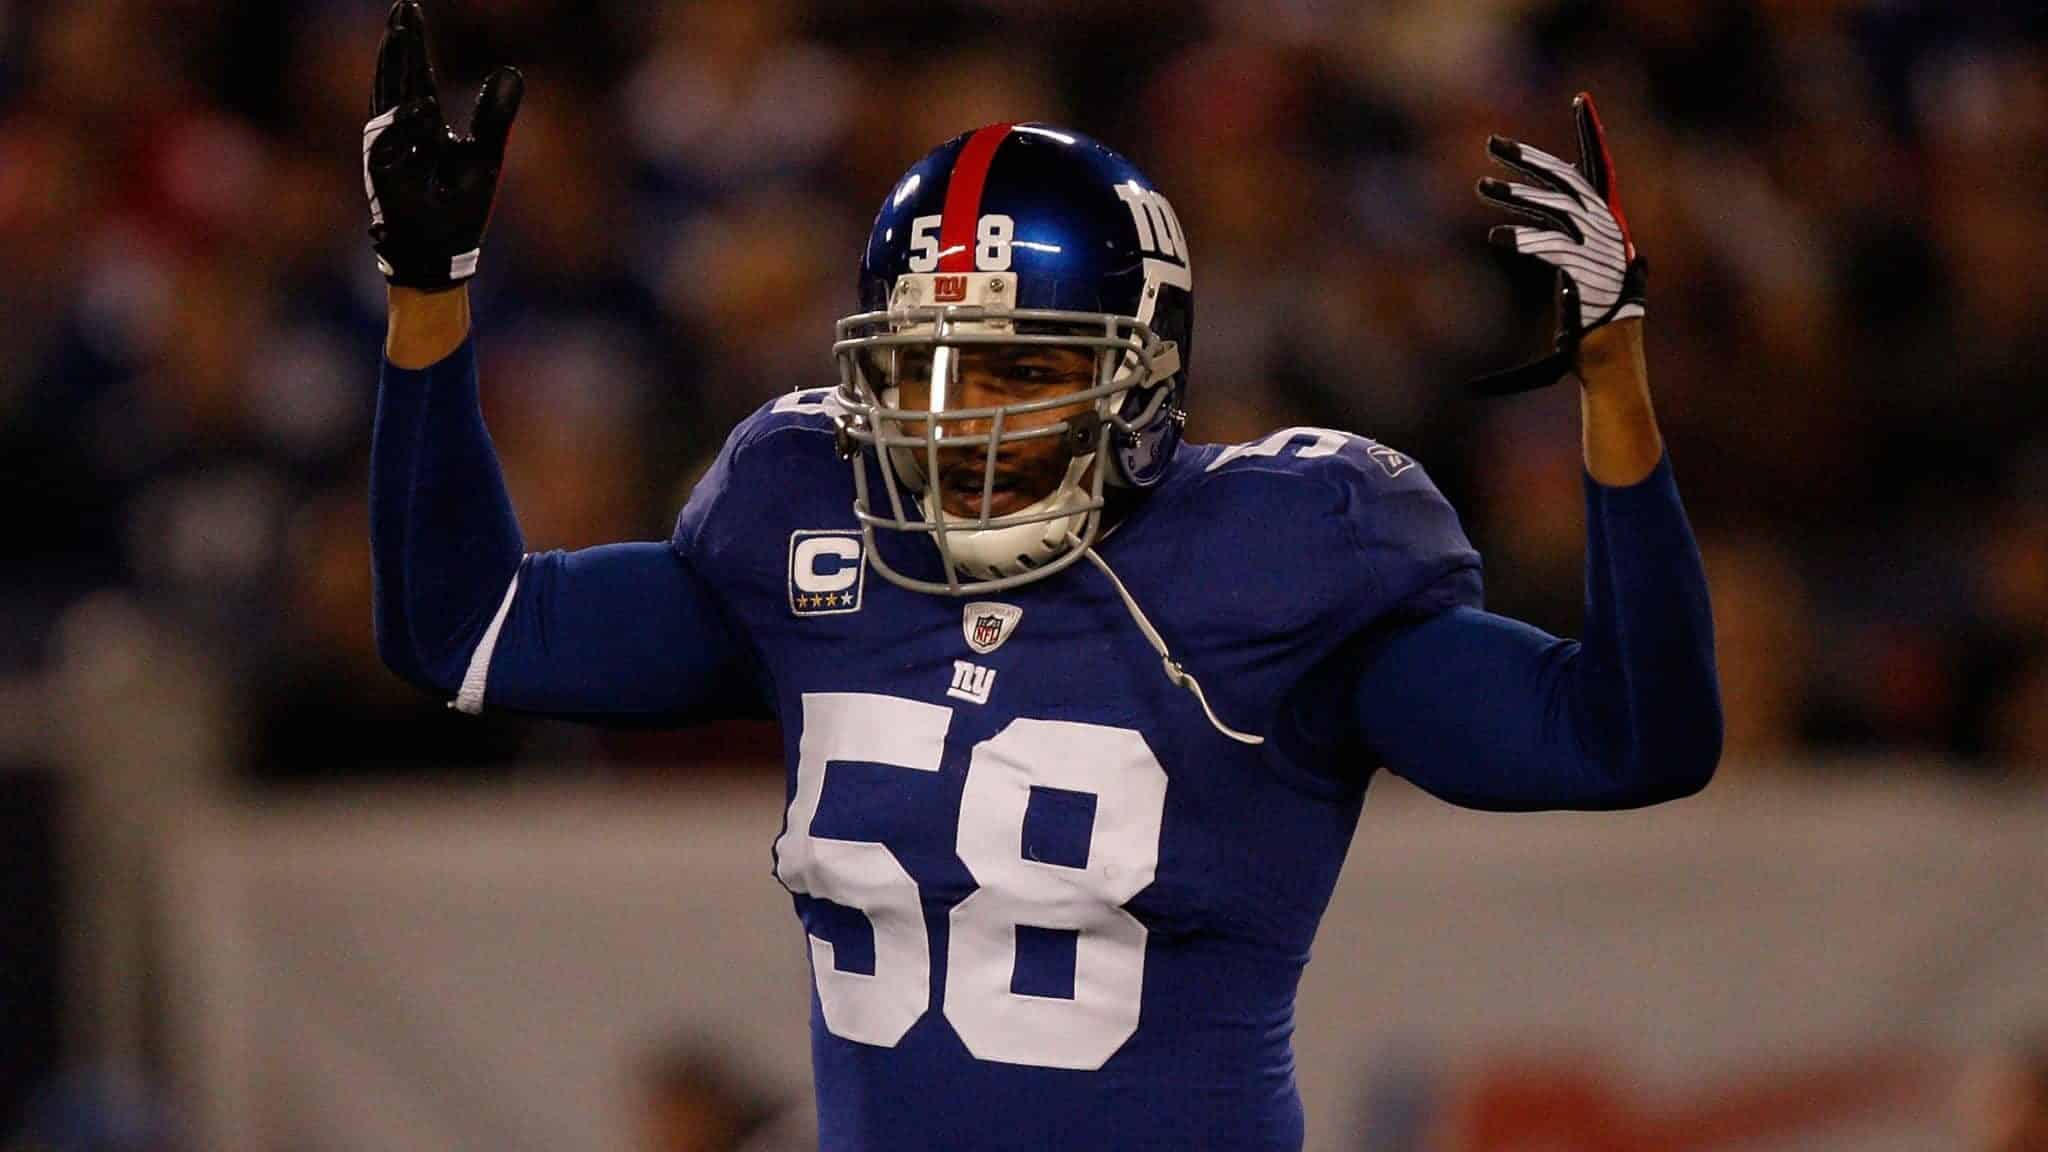 EAST RUTHERFORD, NJ - OCTOBER 25: Antonio Pierce #58 of the New York Giants gets the crowd going against the Arizona Cardinals on October 25, 2009 at Giants Stadium in East Rutherford, New Jersey.